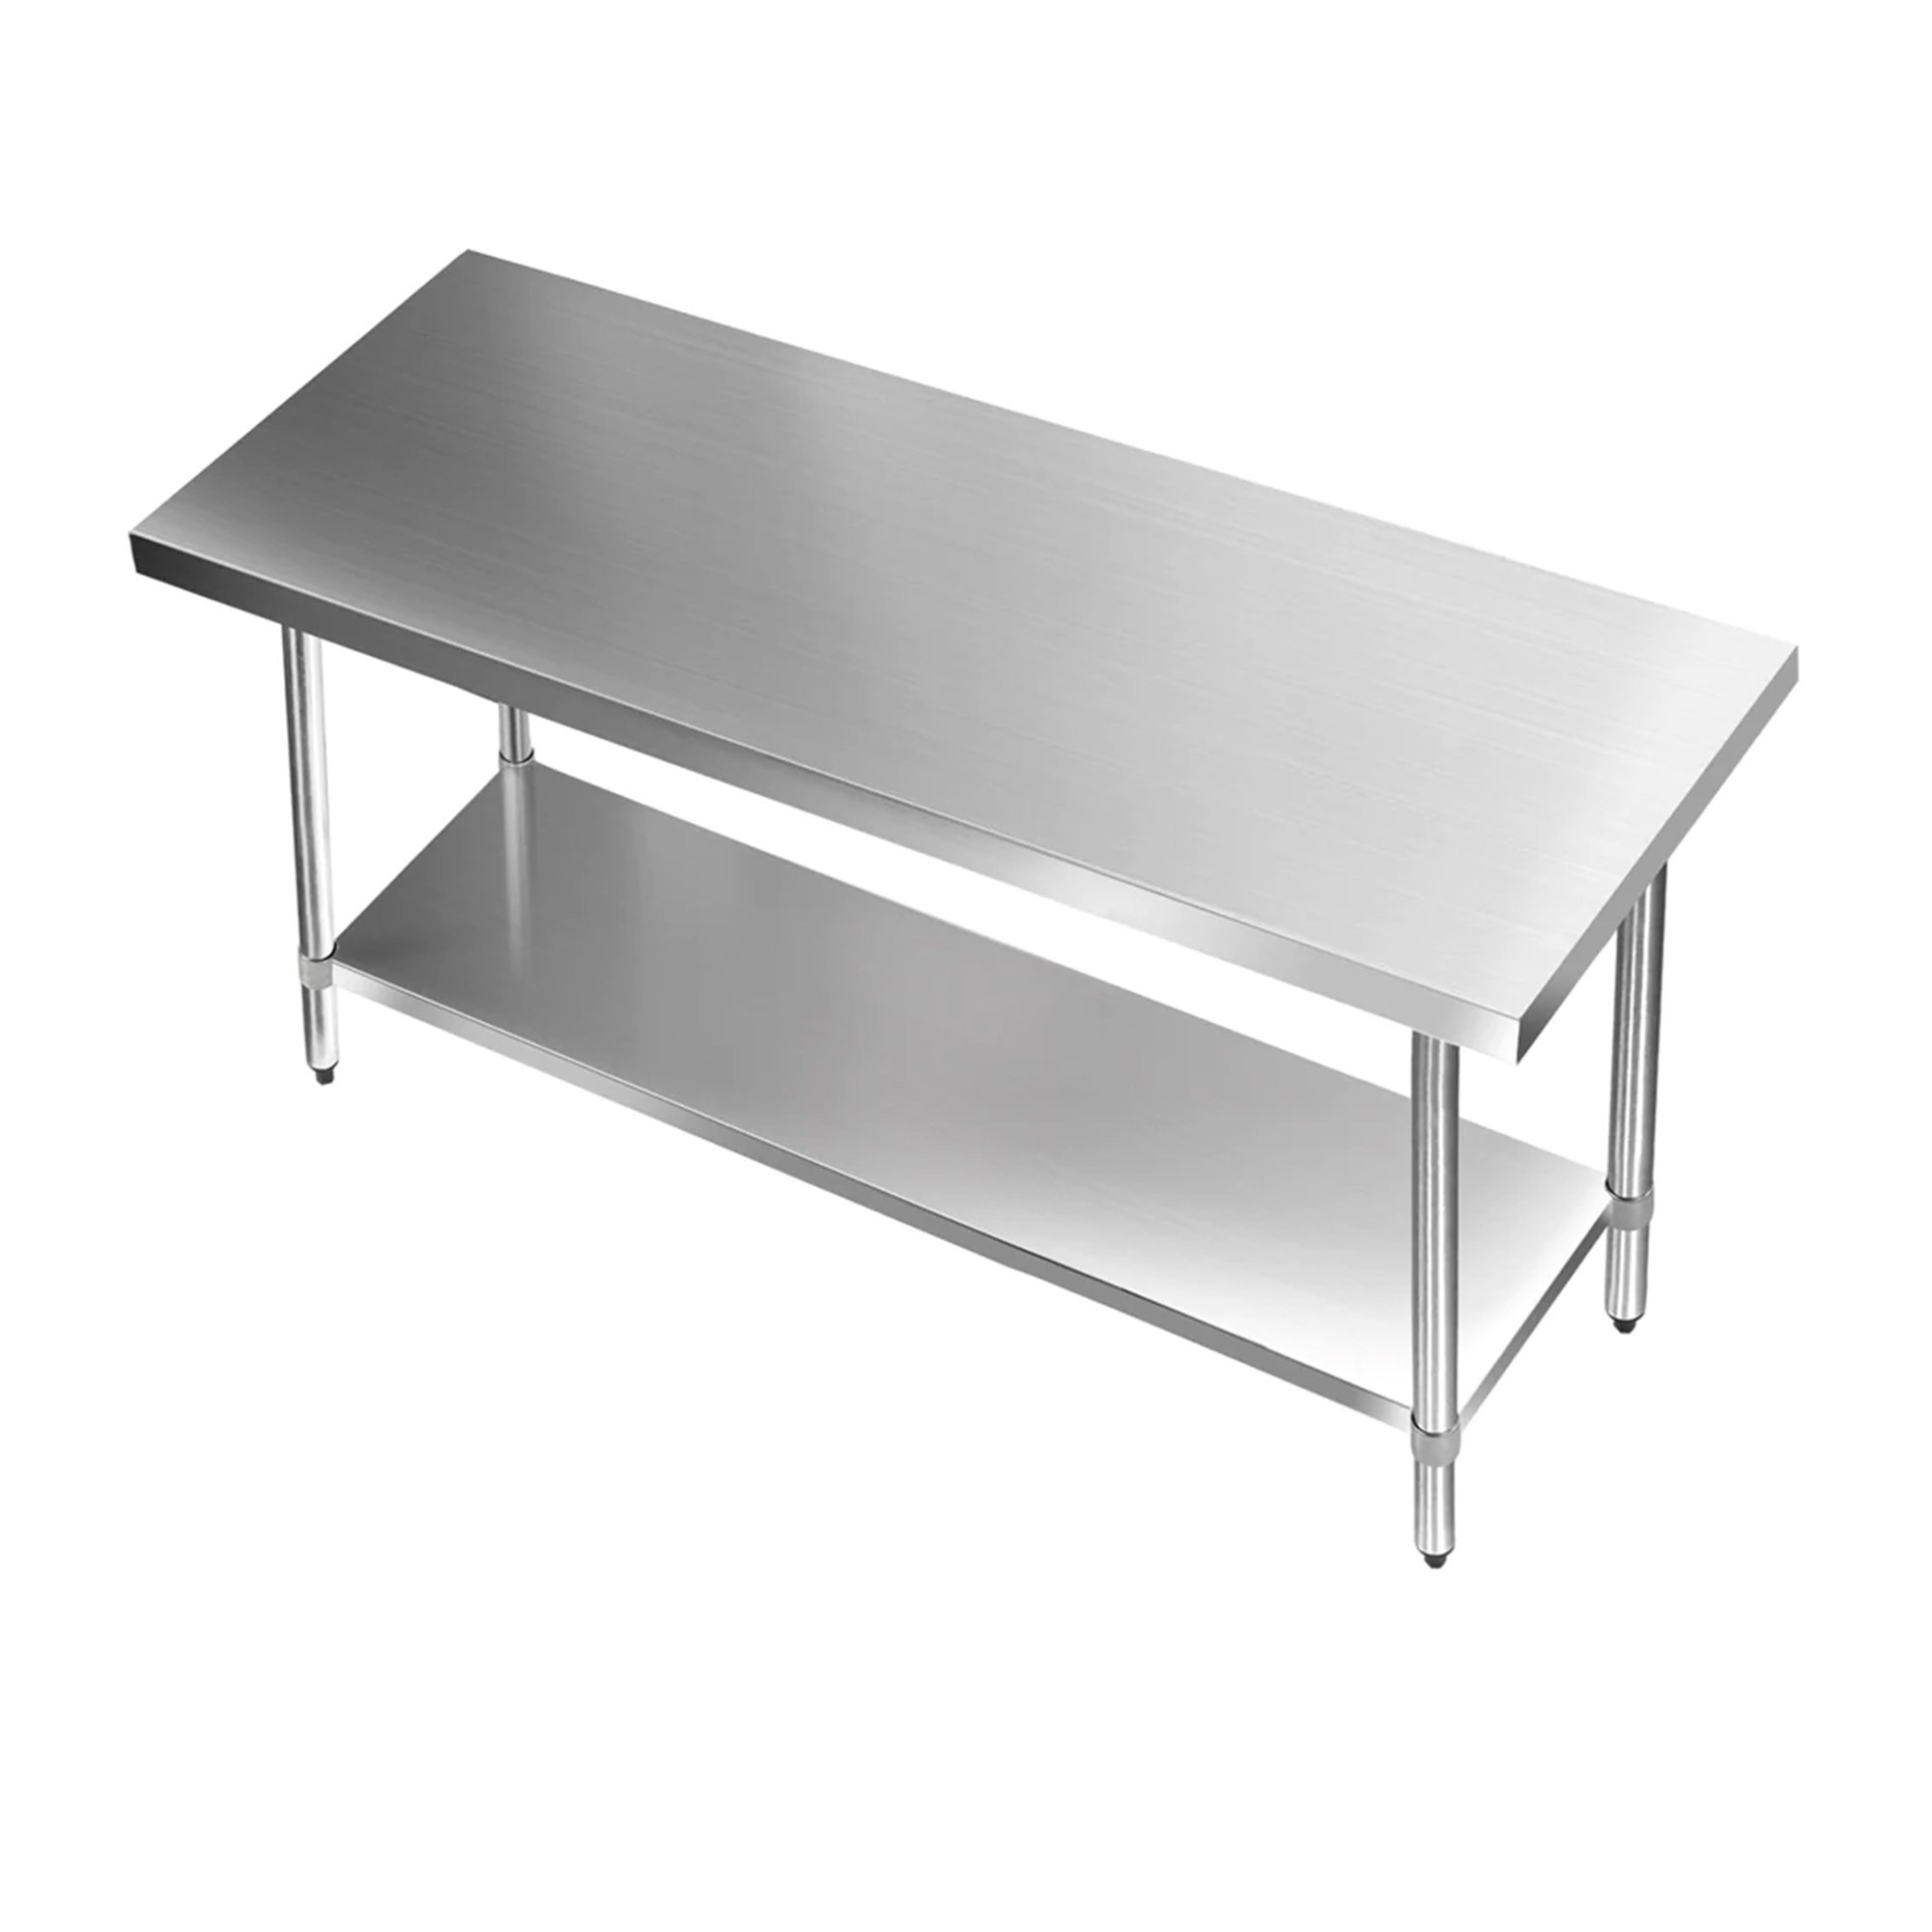 Cefito 430 Stainless Steel Kitchen Bench 152.4x61cm Image 2